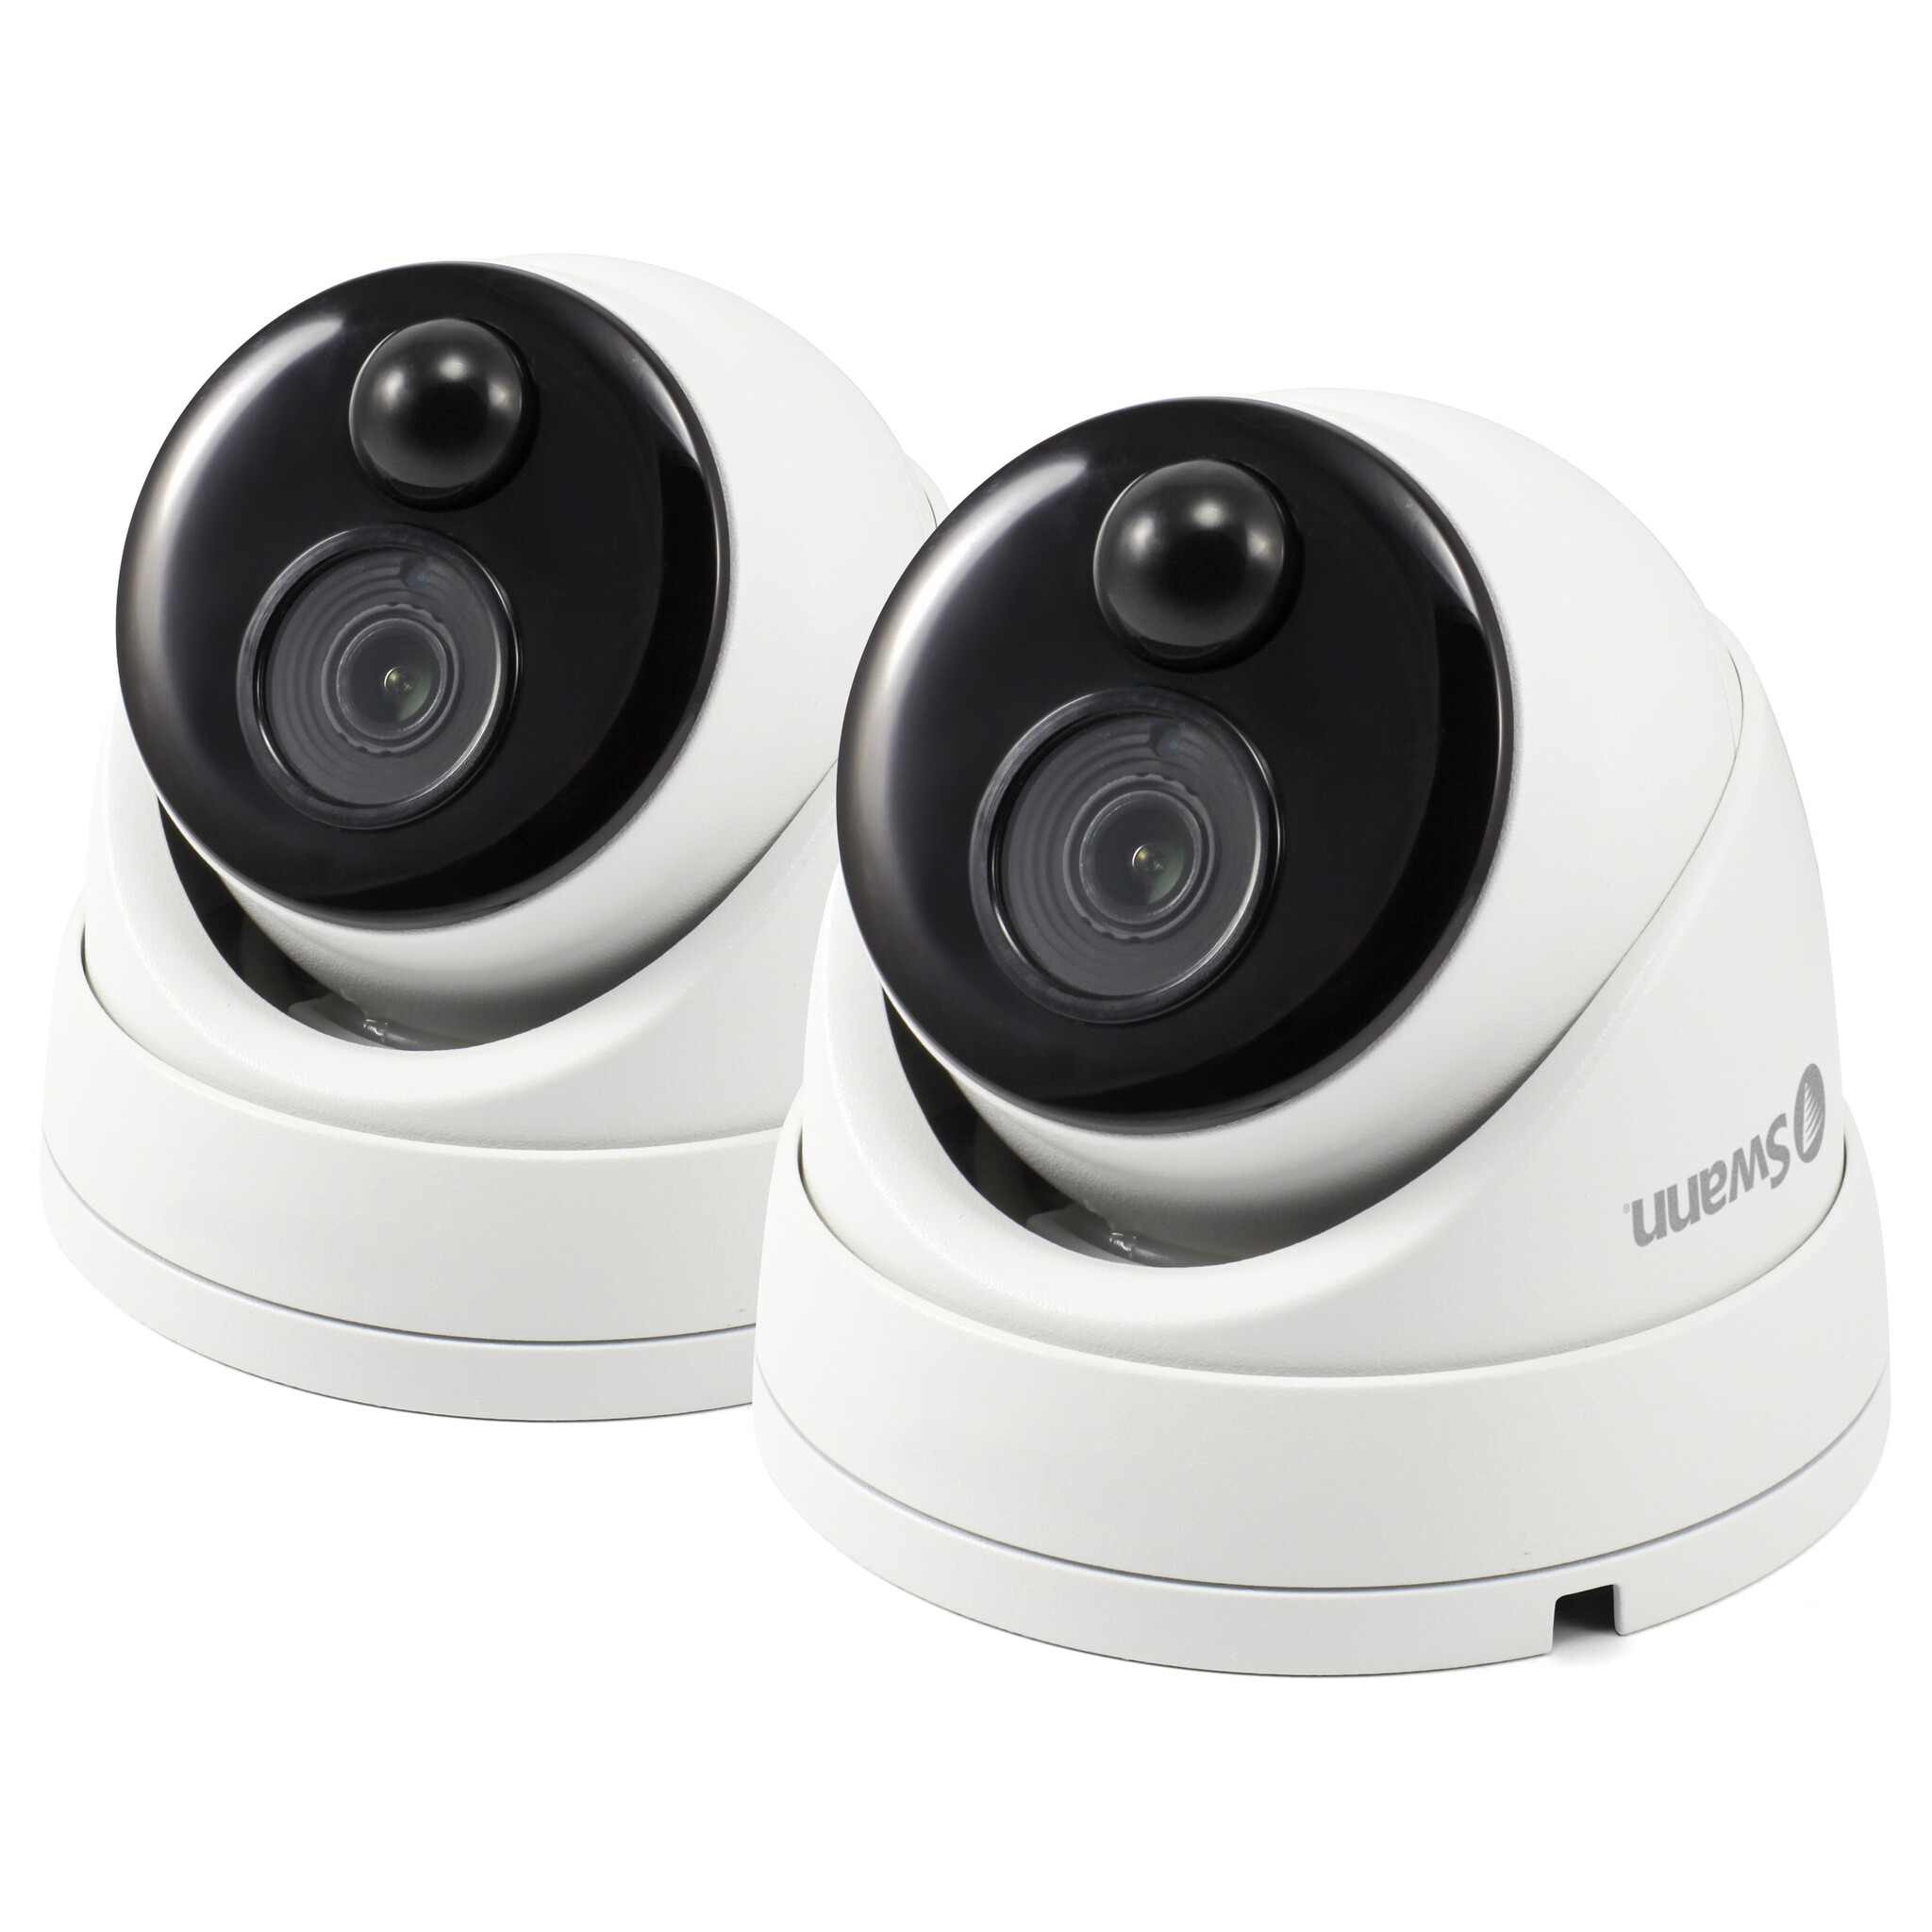 Swann Add on Dome Camera 2 Pack Full HD 1080p Smart Home Security Camera – White (SWPRO-1080MSDPK) #366335